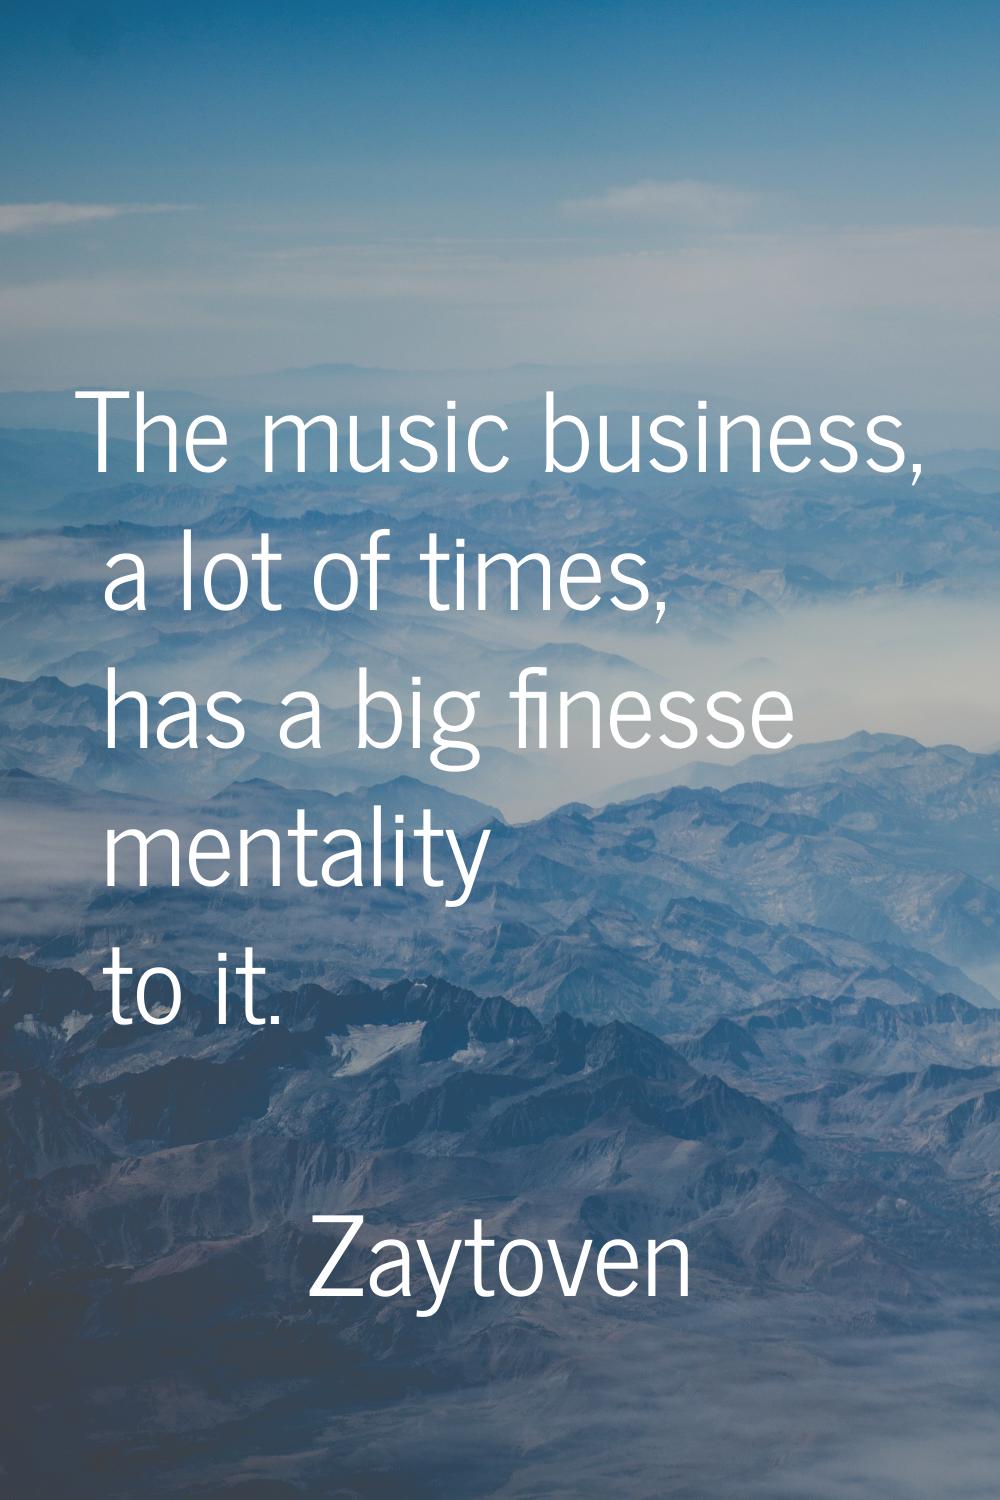 The music business, a lot of times, has a big finesse mentality to it.